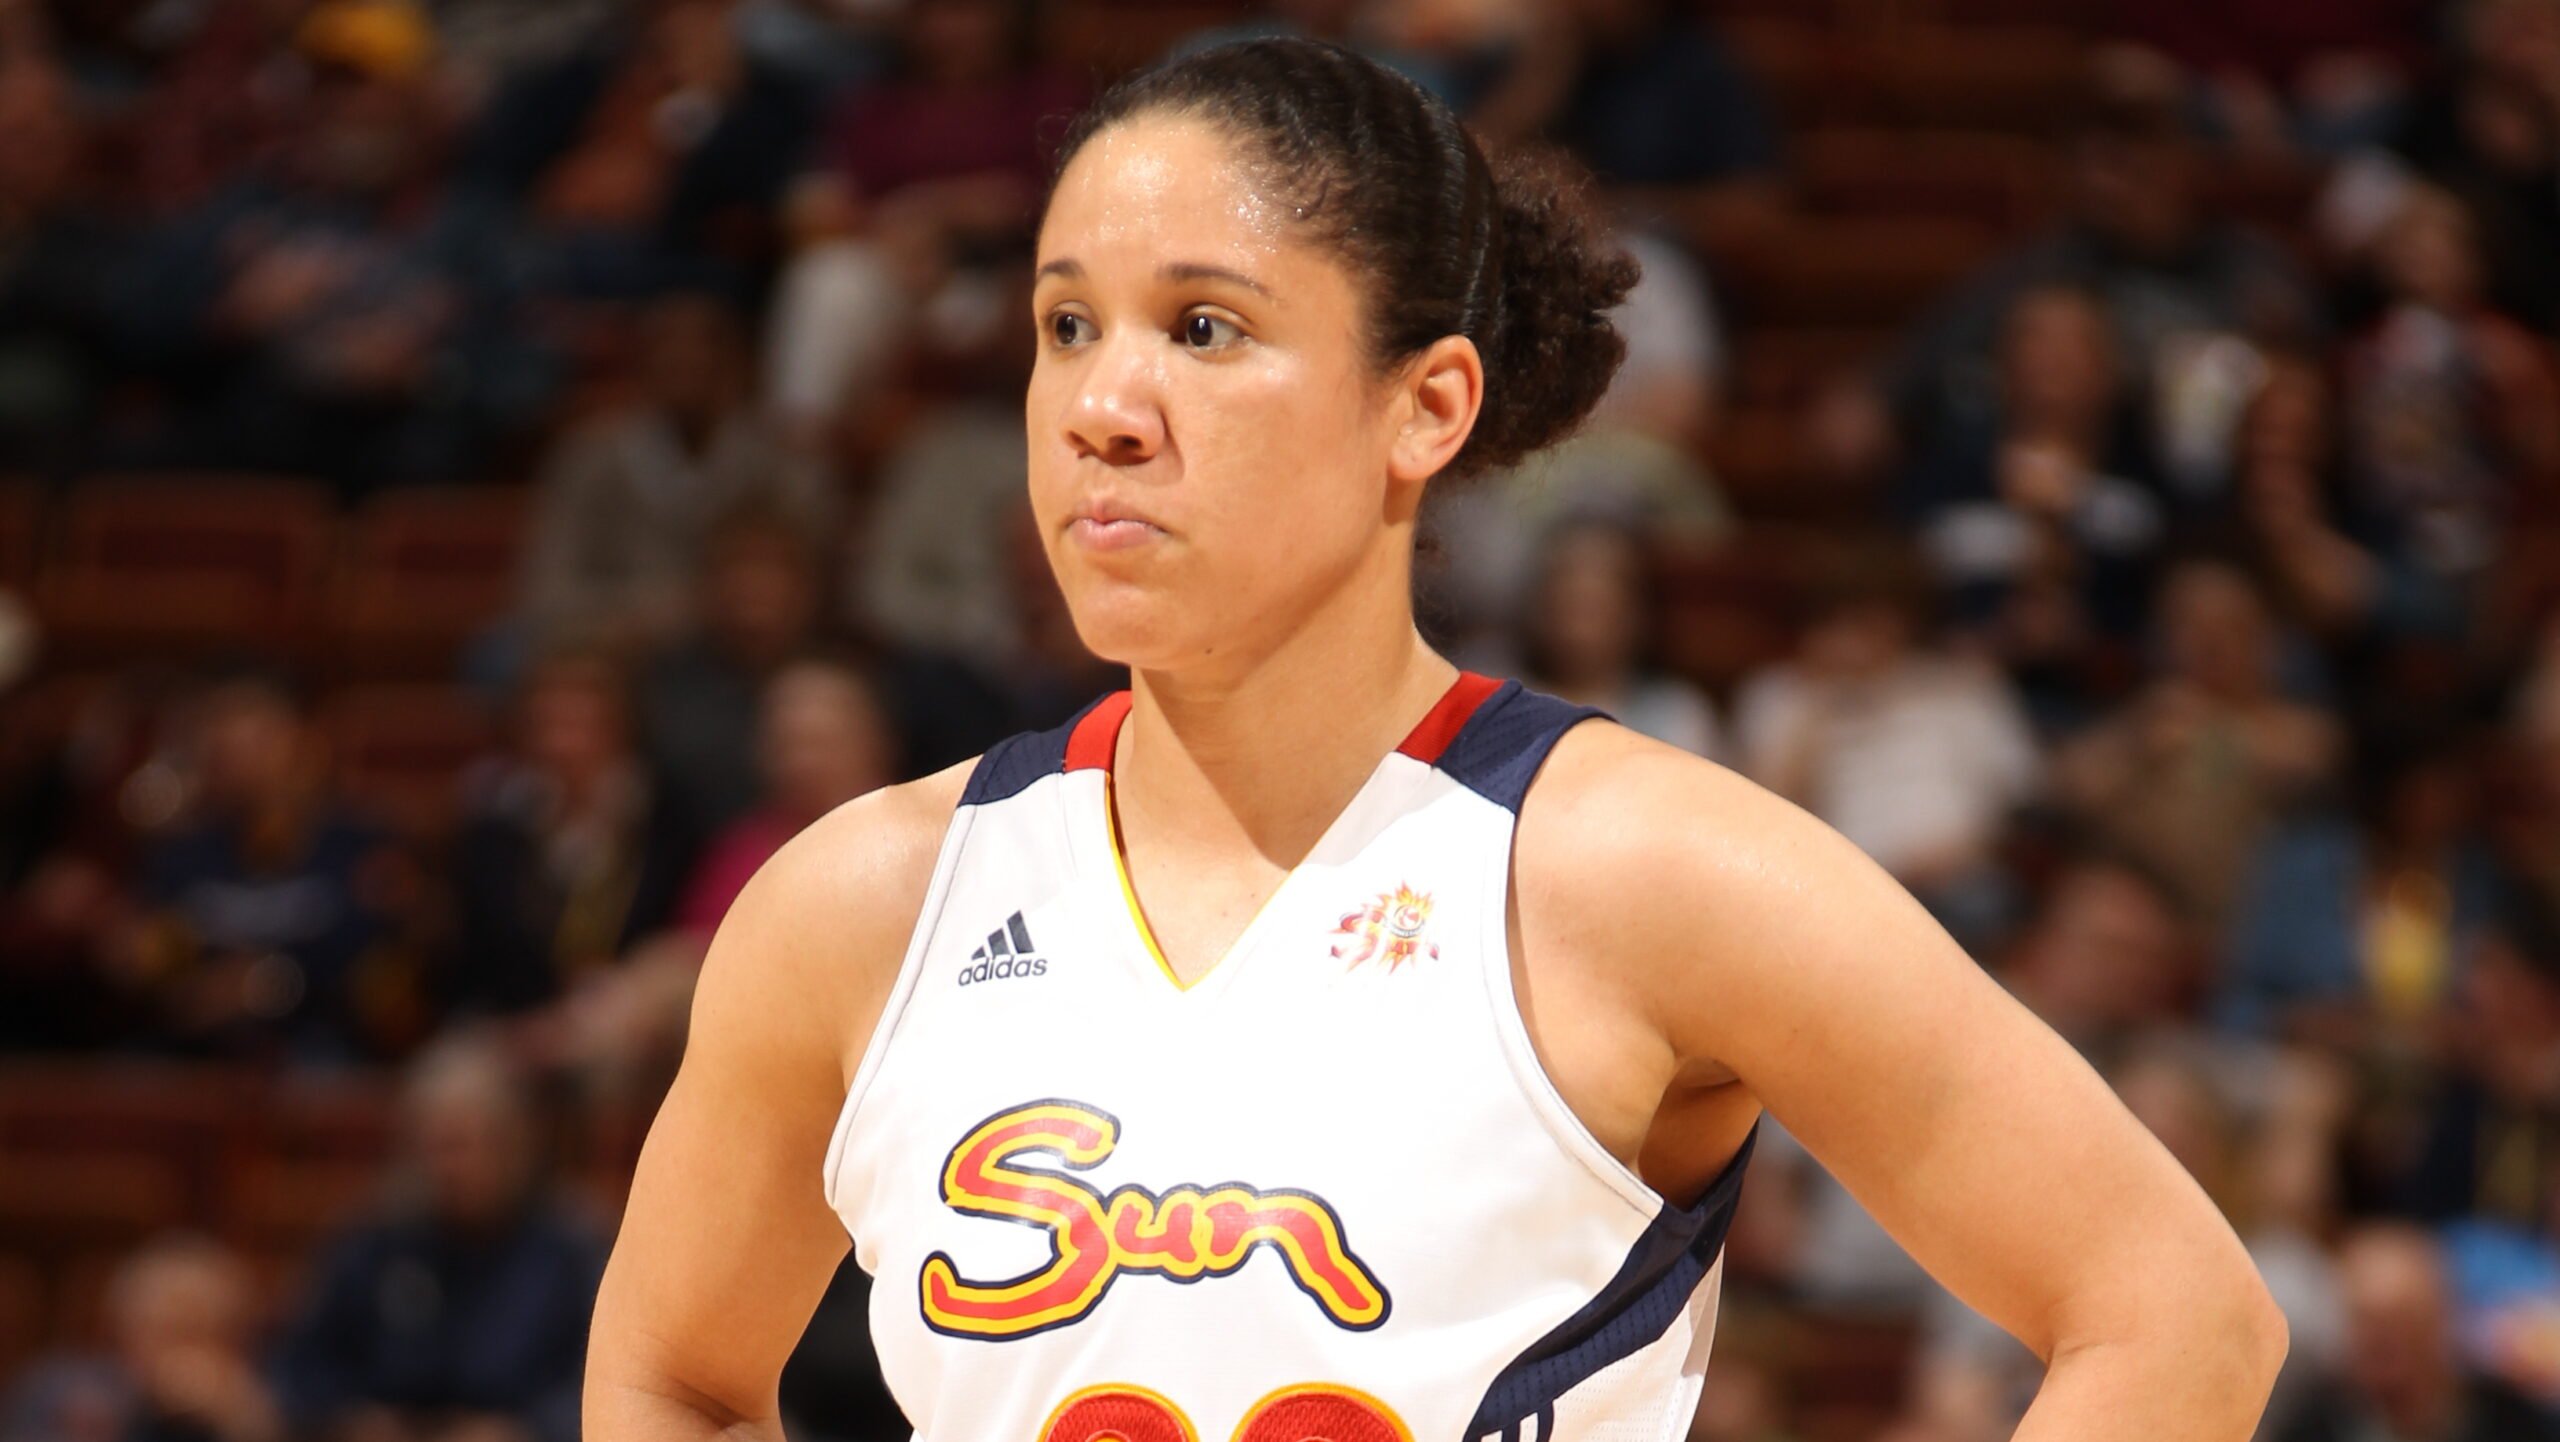 Dishin & Swishin 11/21/12 Podcast: A Special Thanksgiving chat with Kara Lawson